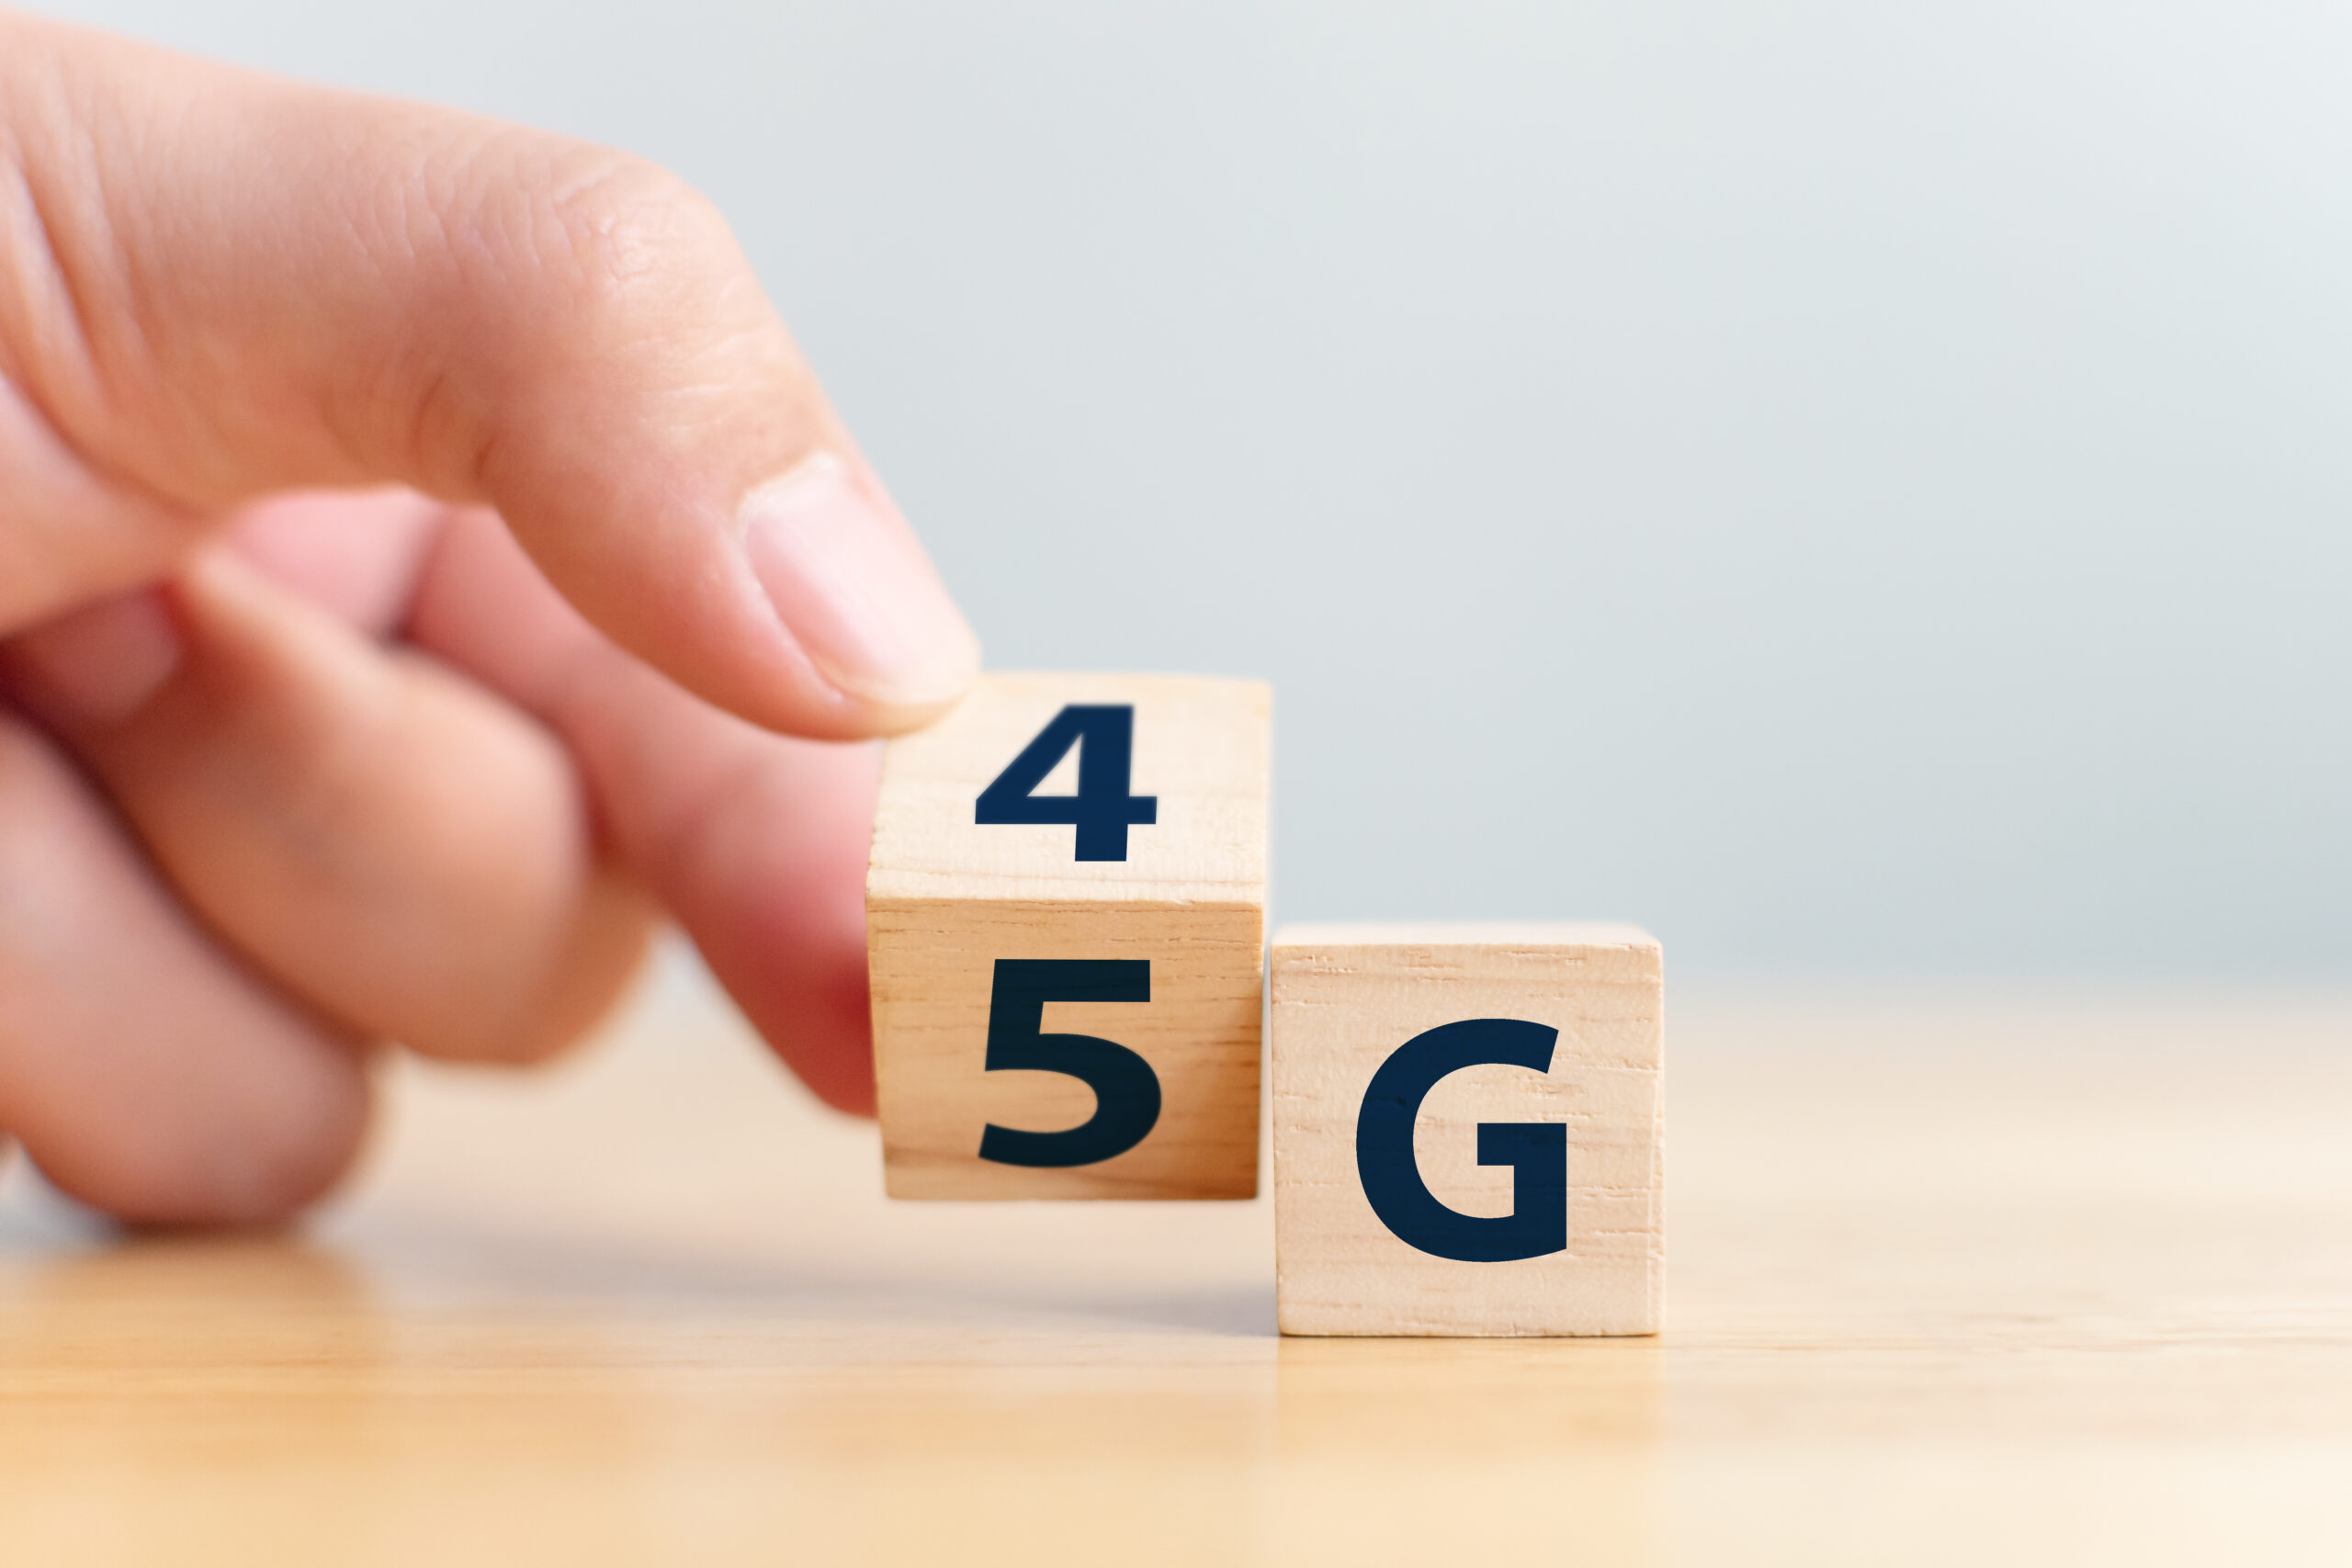 Geek insider, geekinsider, geekinsider. Com,, why you need 5g & 4g uk proxies to take your online experience to the next level, internet